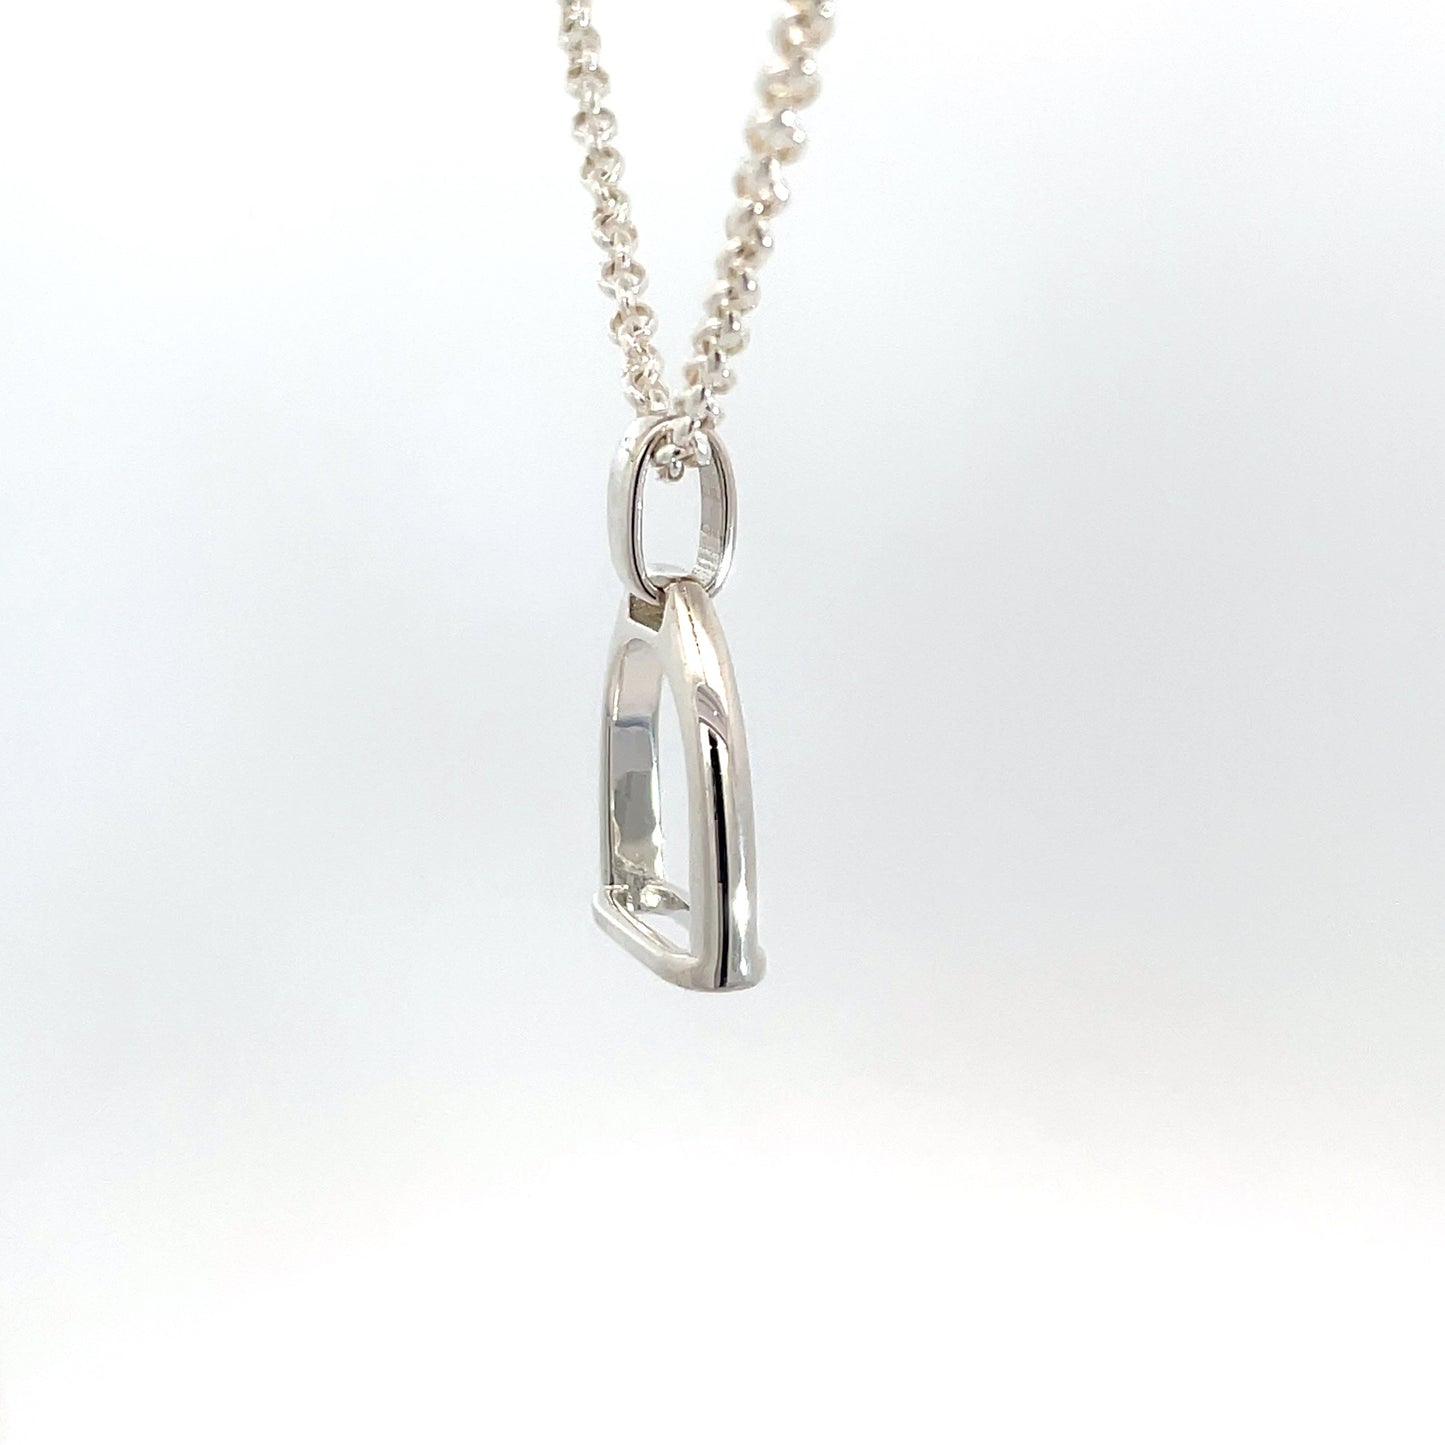 Sterling Silver Stirrup Pendant and chain